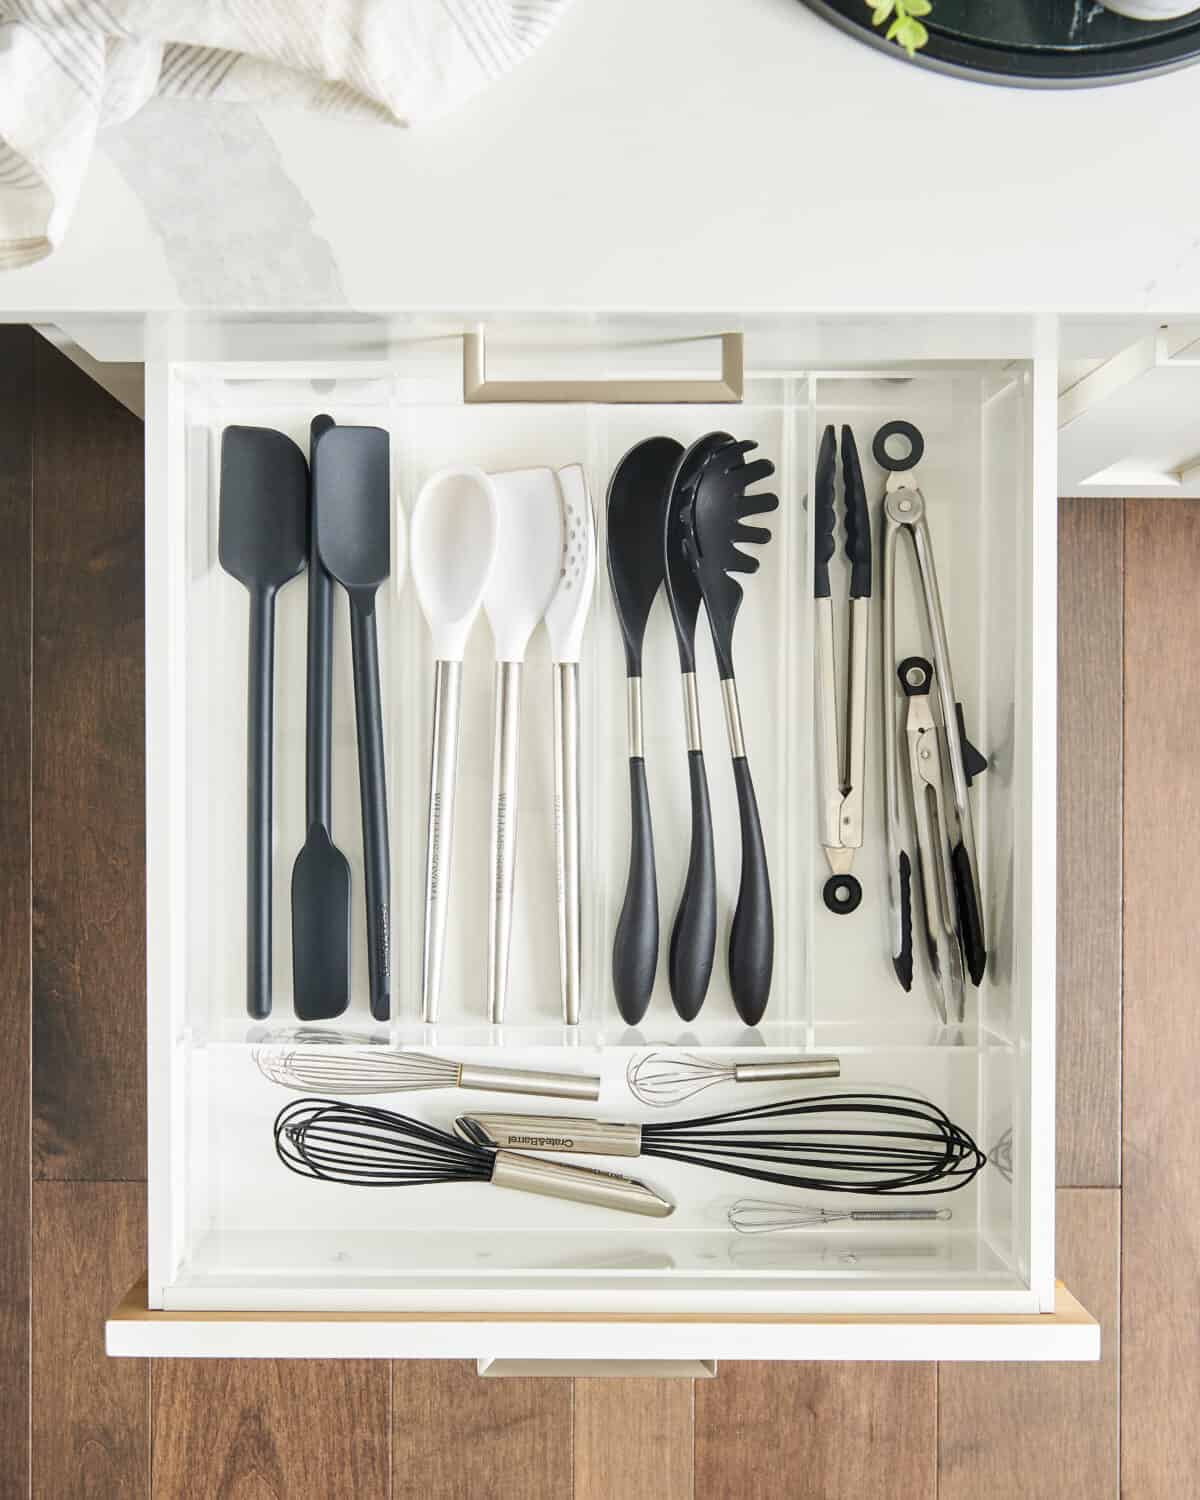 open drawer will kitchen tools.